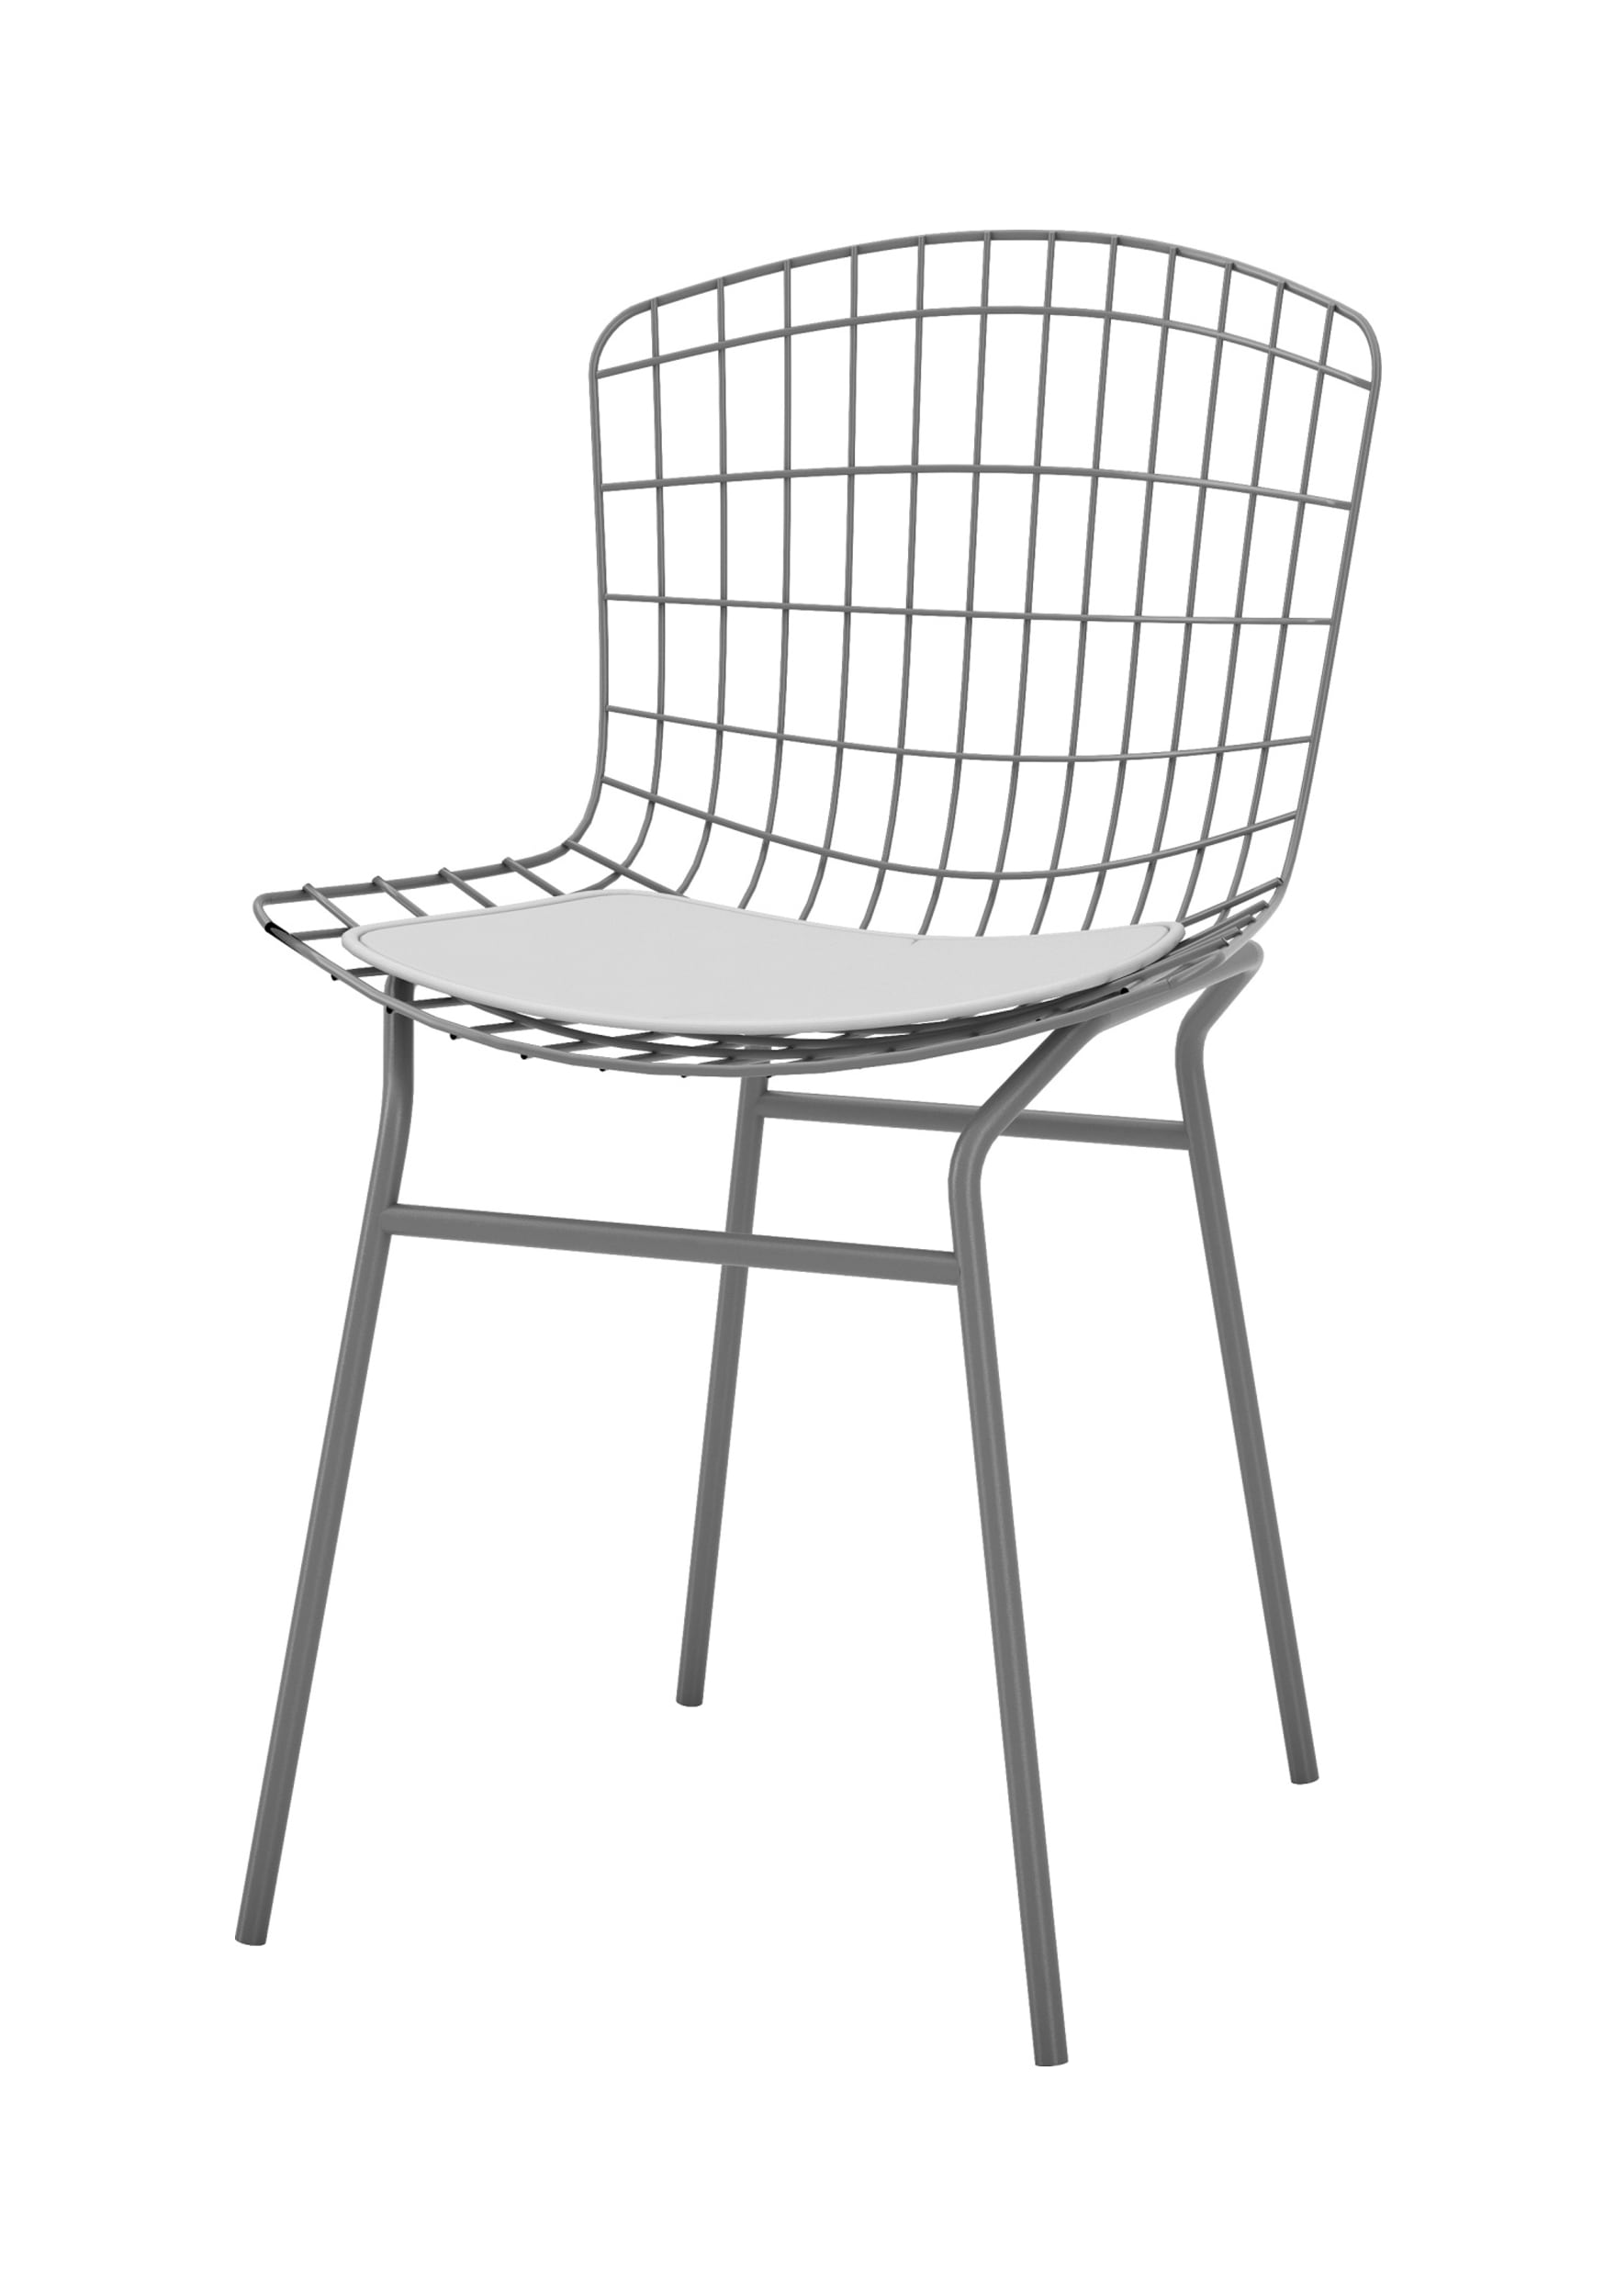 Madeline Chair with Seat Cushion in Charcoal Gray and White